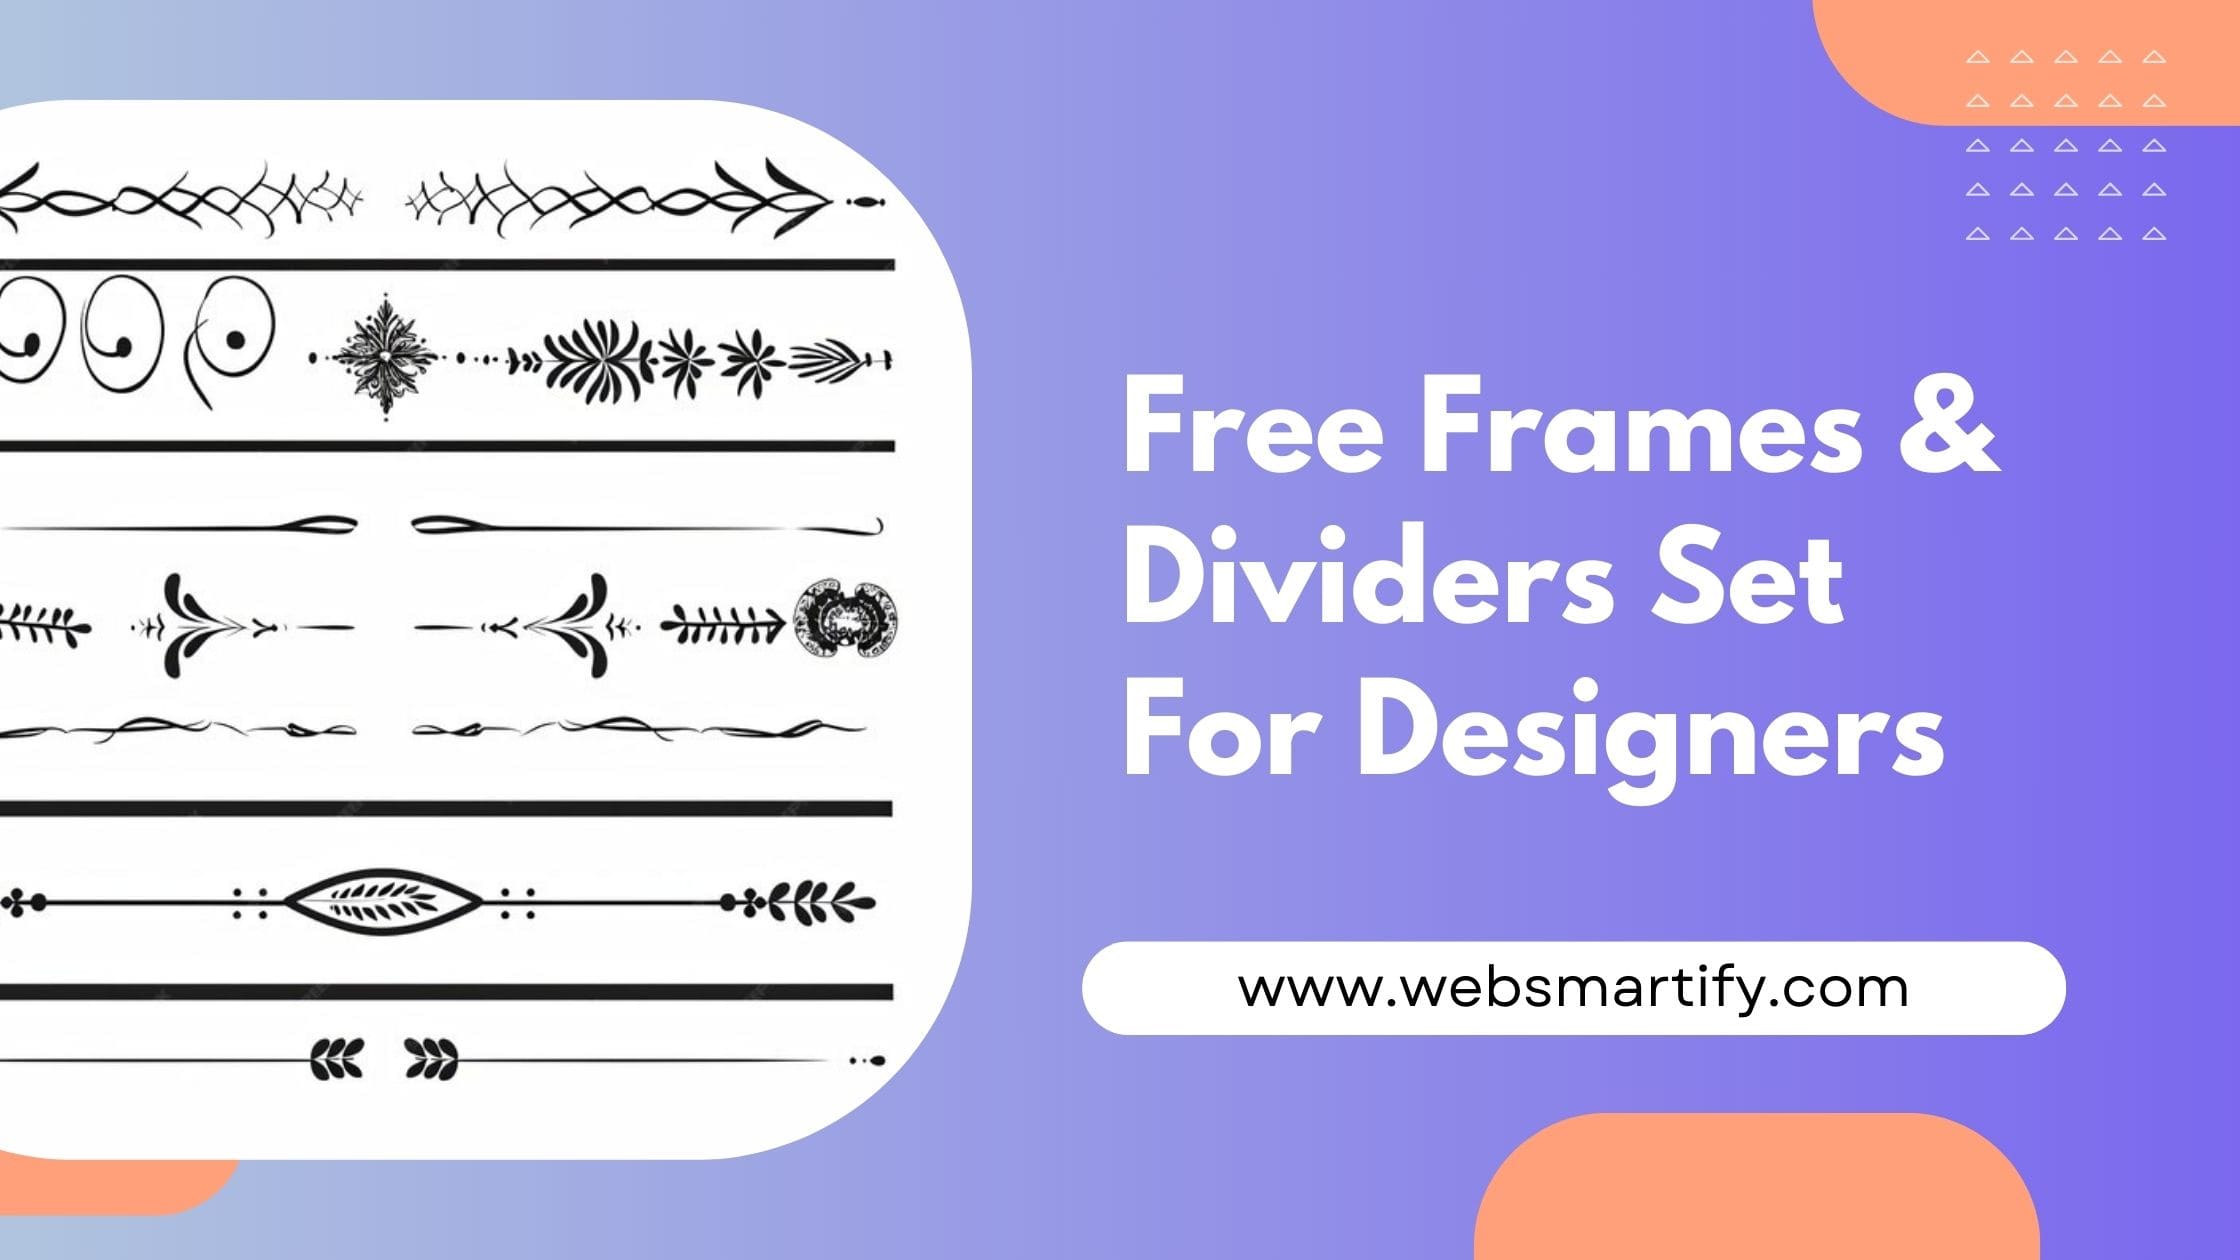 Download our Frames & Dividers Set for designers to enhance your projects with high-quality resources - Websmartify